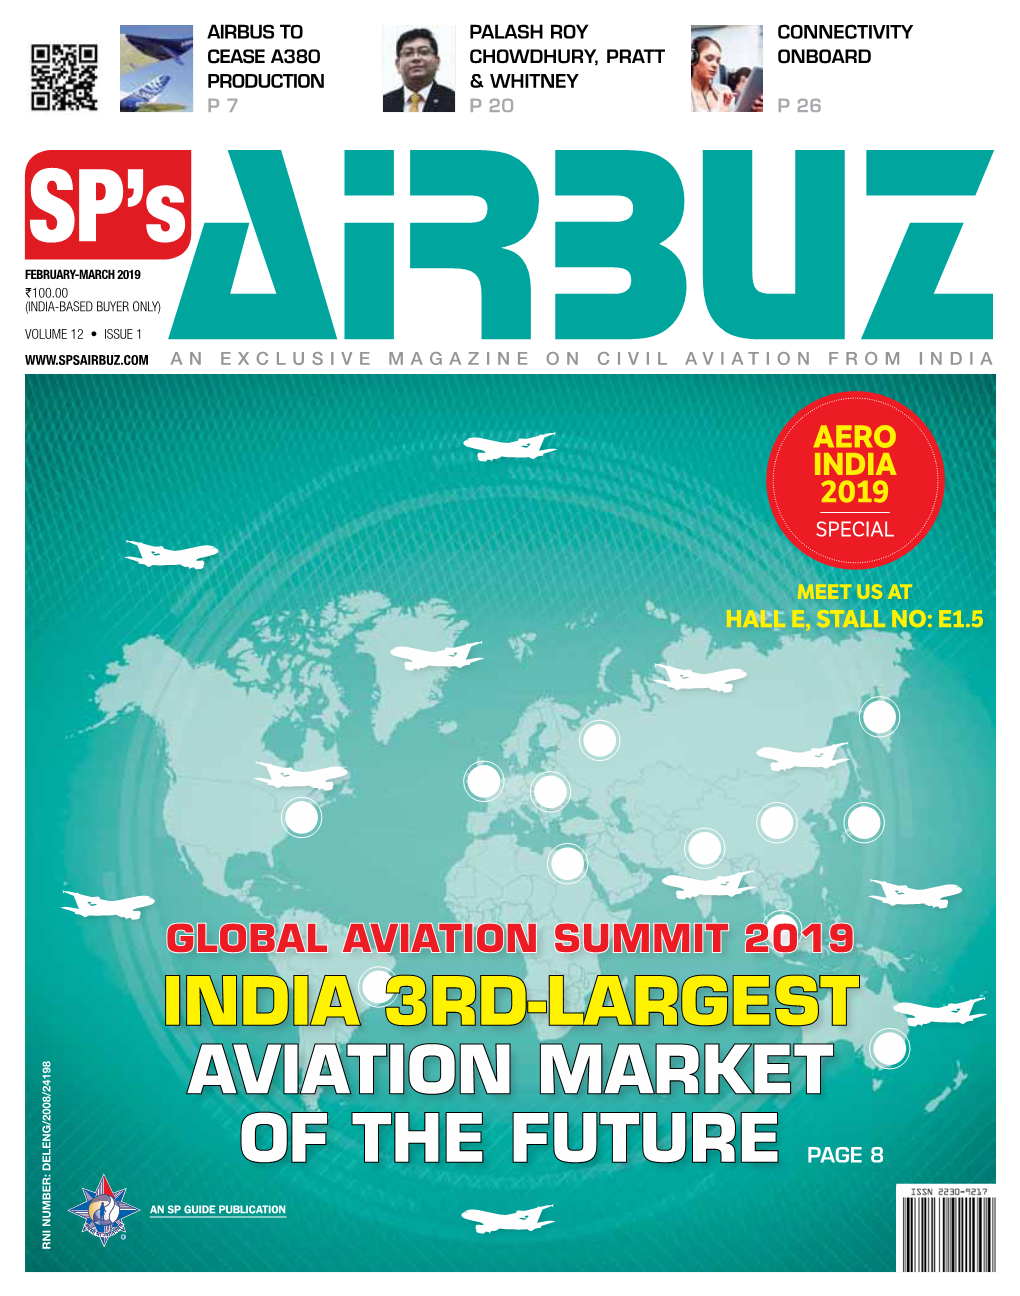 India 3Rd-Largest Aviation Market of the Future